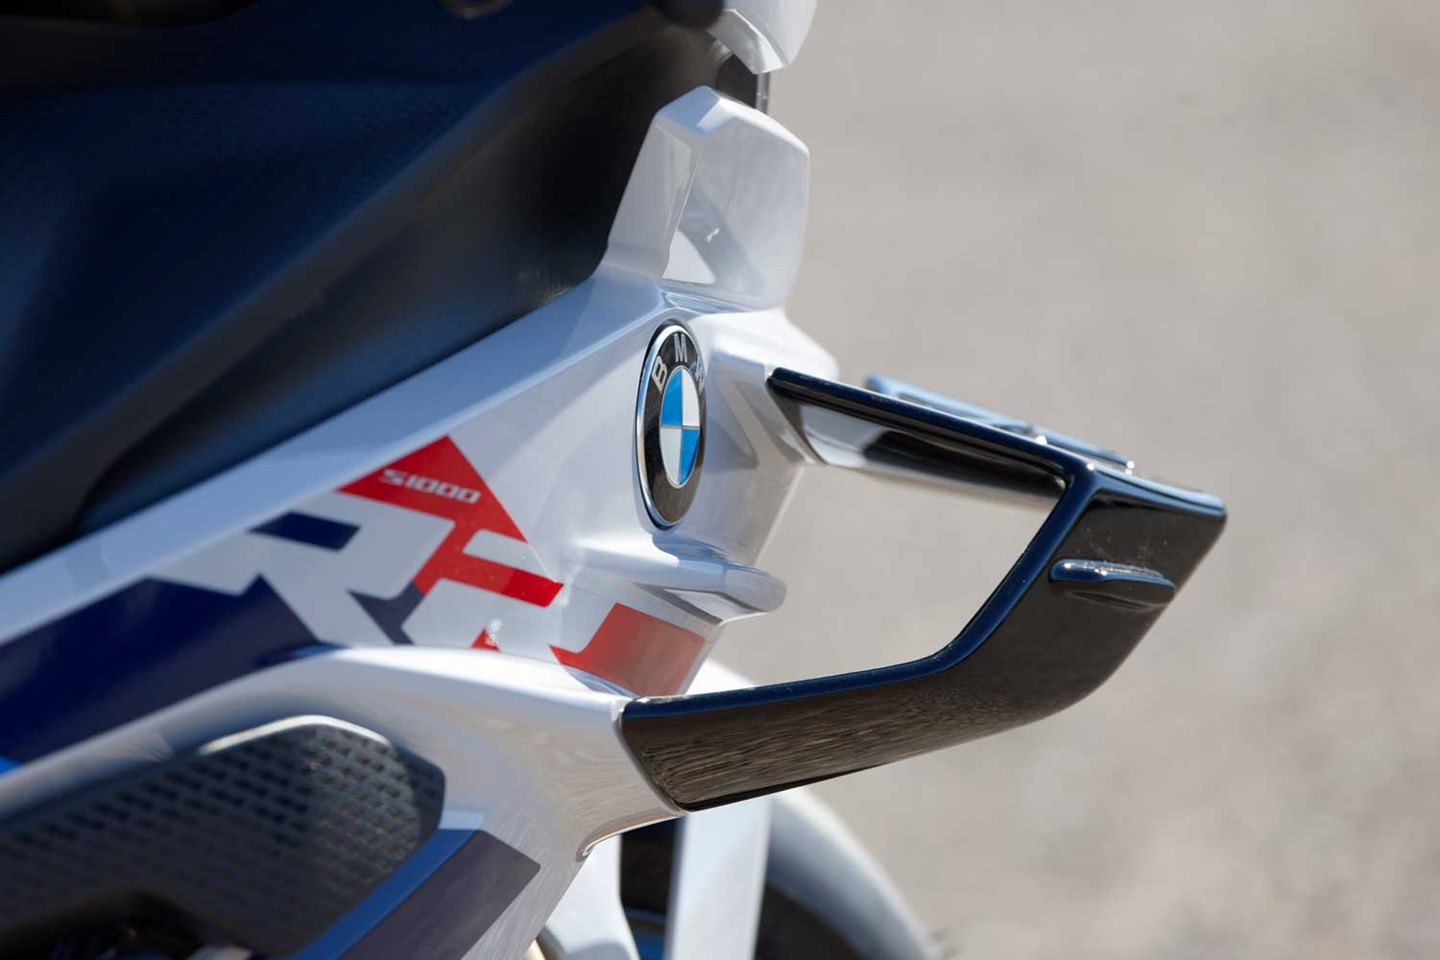 The BMW S1000RR Gets Wings and Updates for the 2023 Model Year